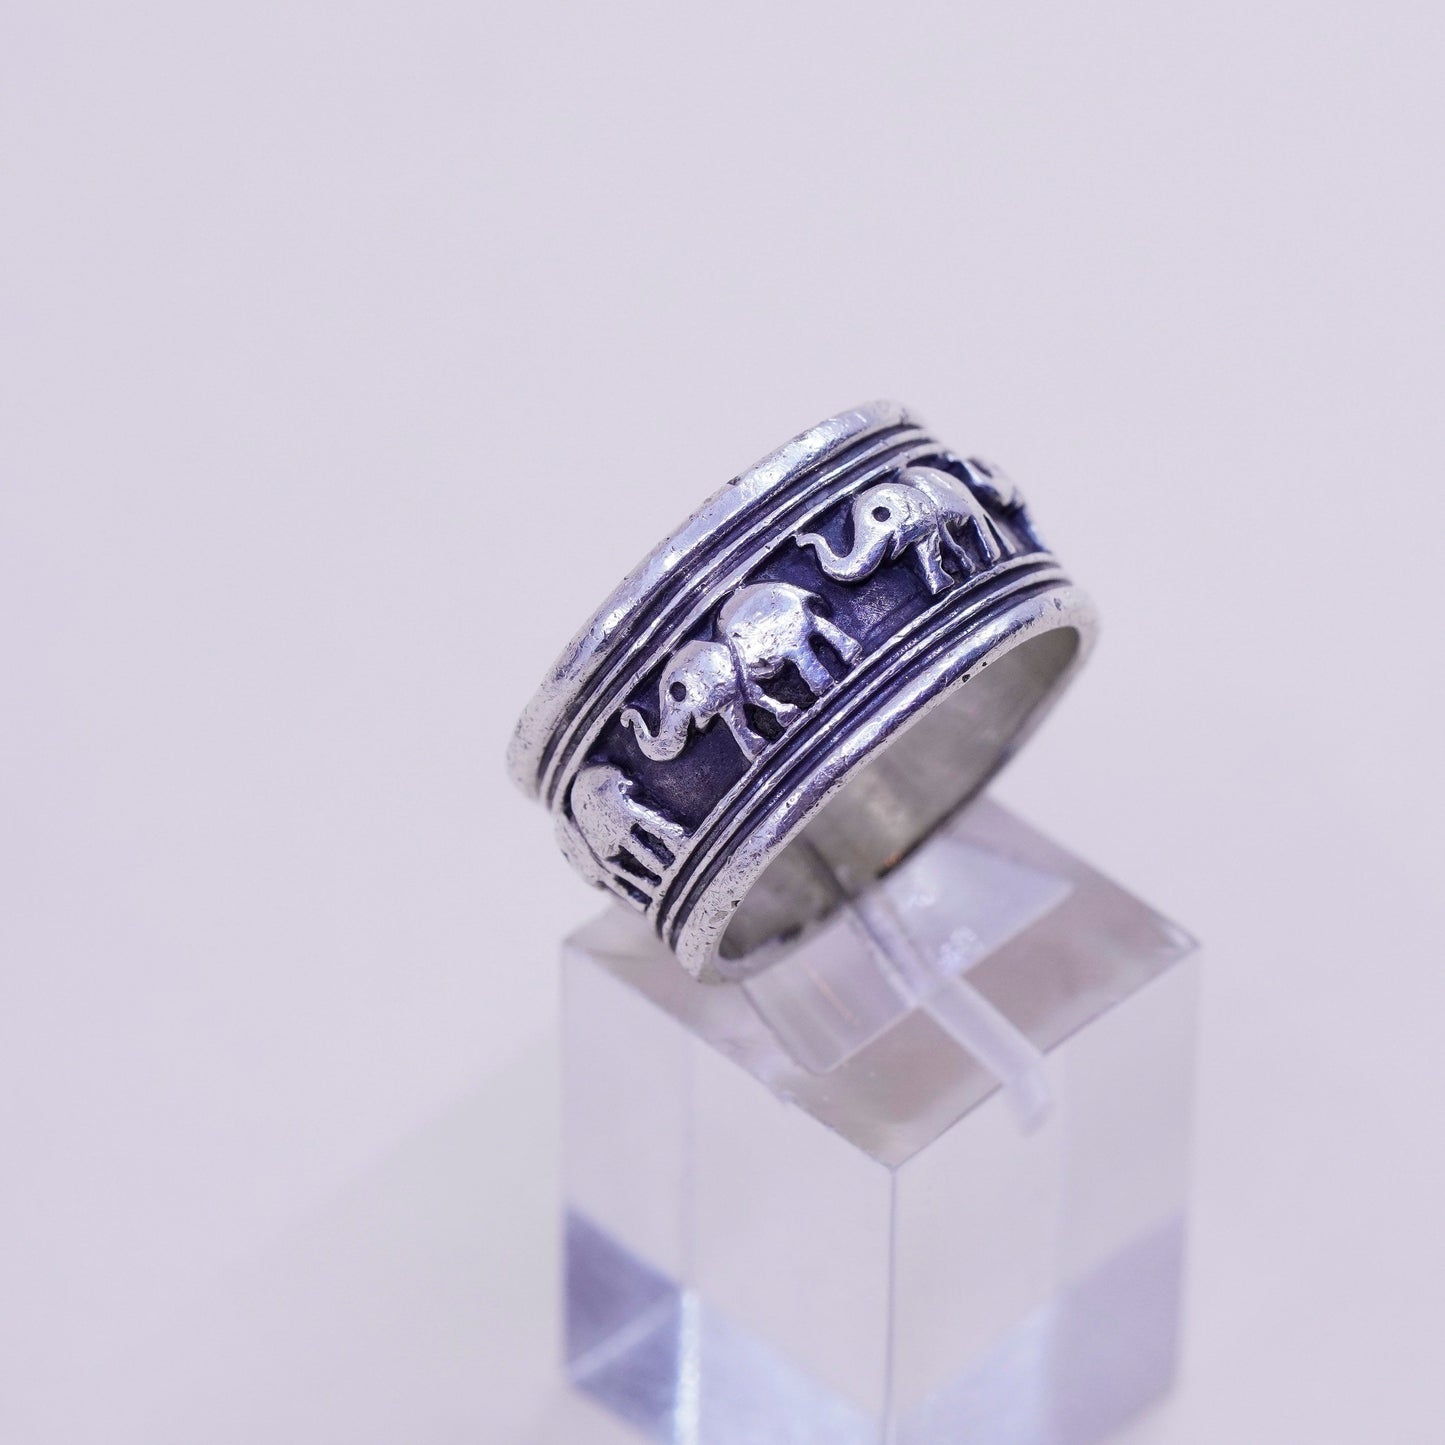 Size 7, vintage sterling silver handmade ring. 925 elephant band